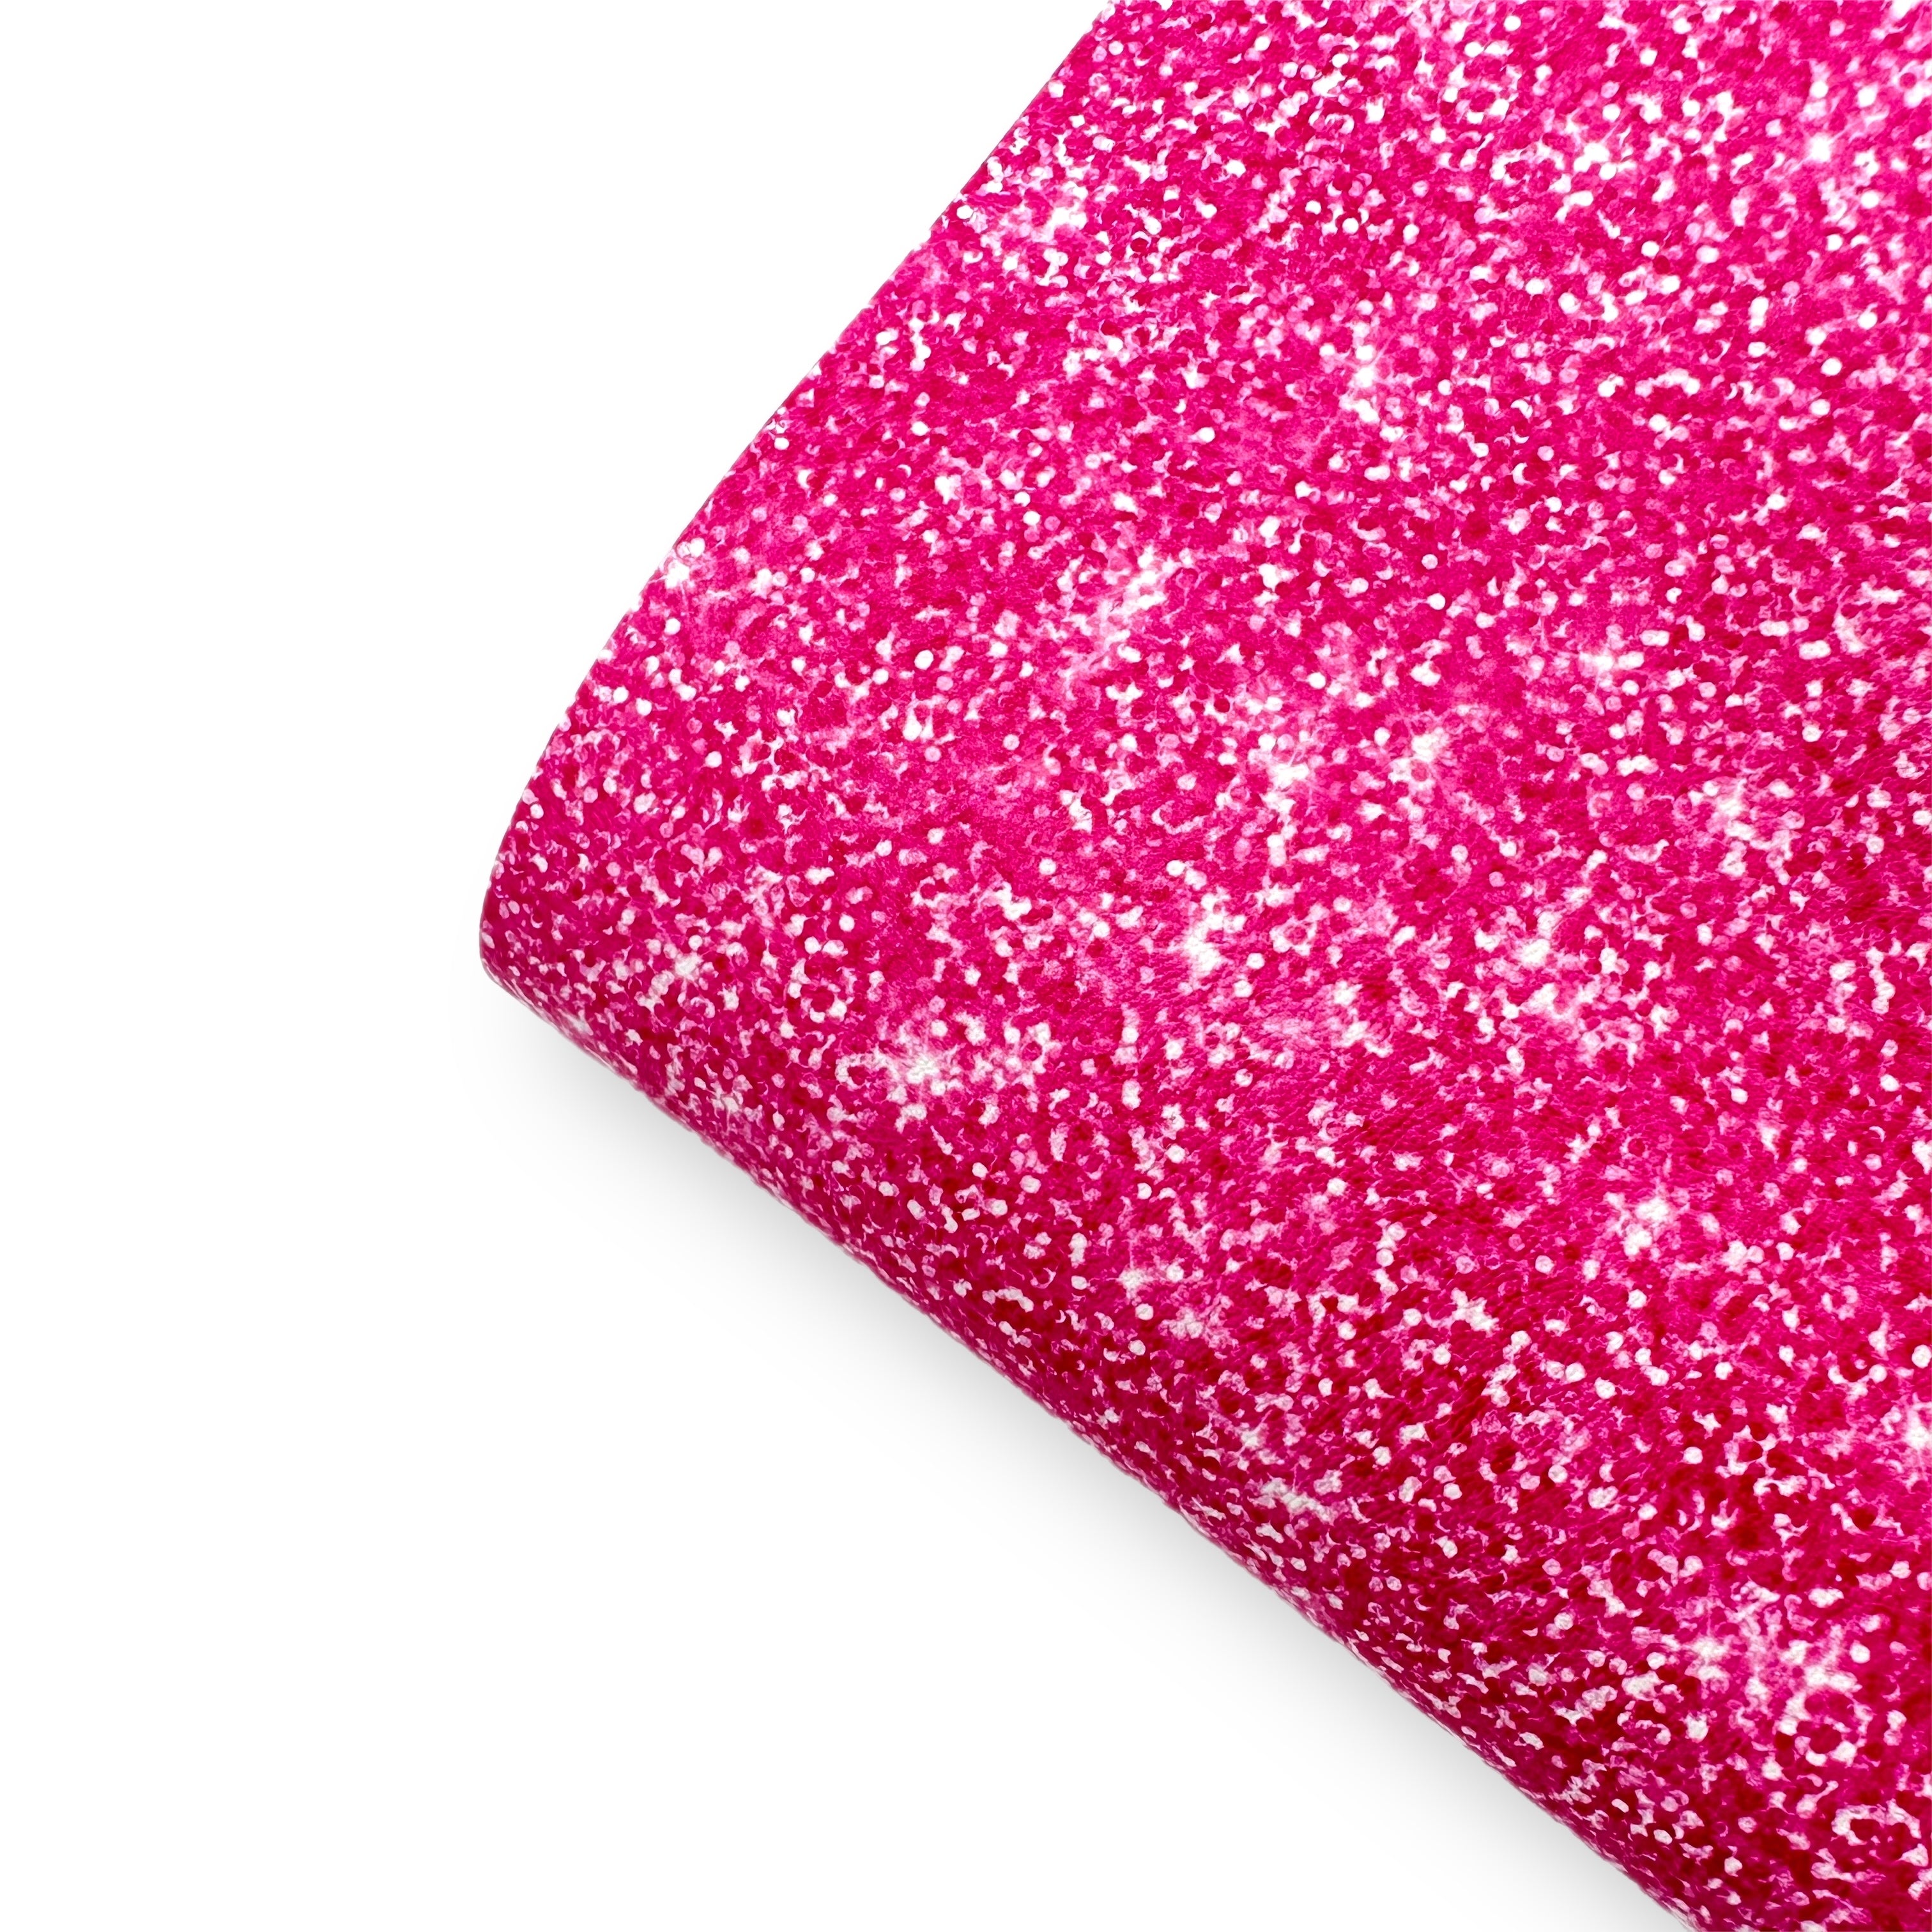 Dolly Pink Faux Glitter Effect Premium Faux Leather Fabric Sheets